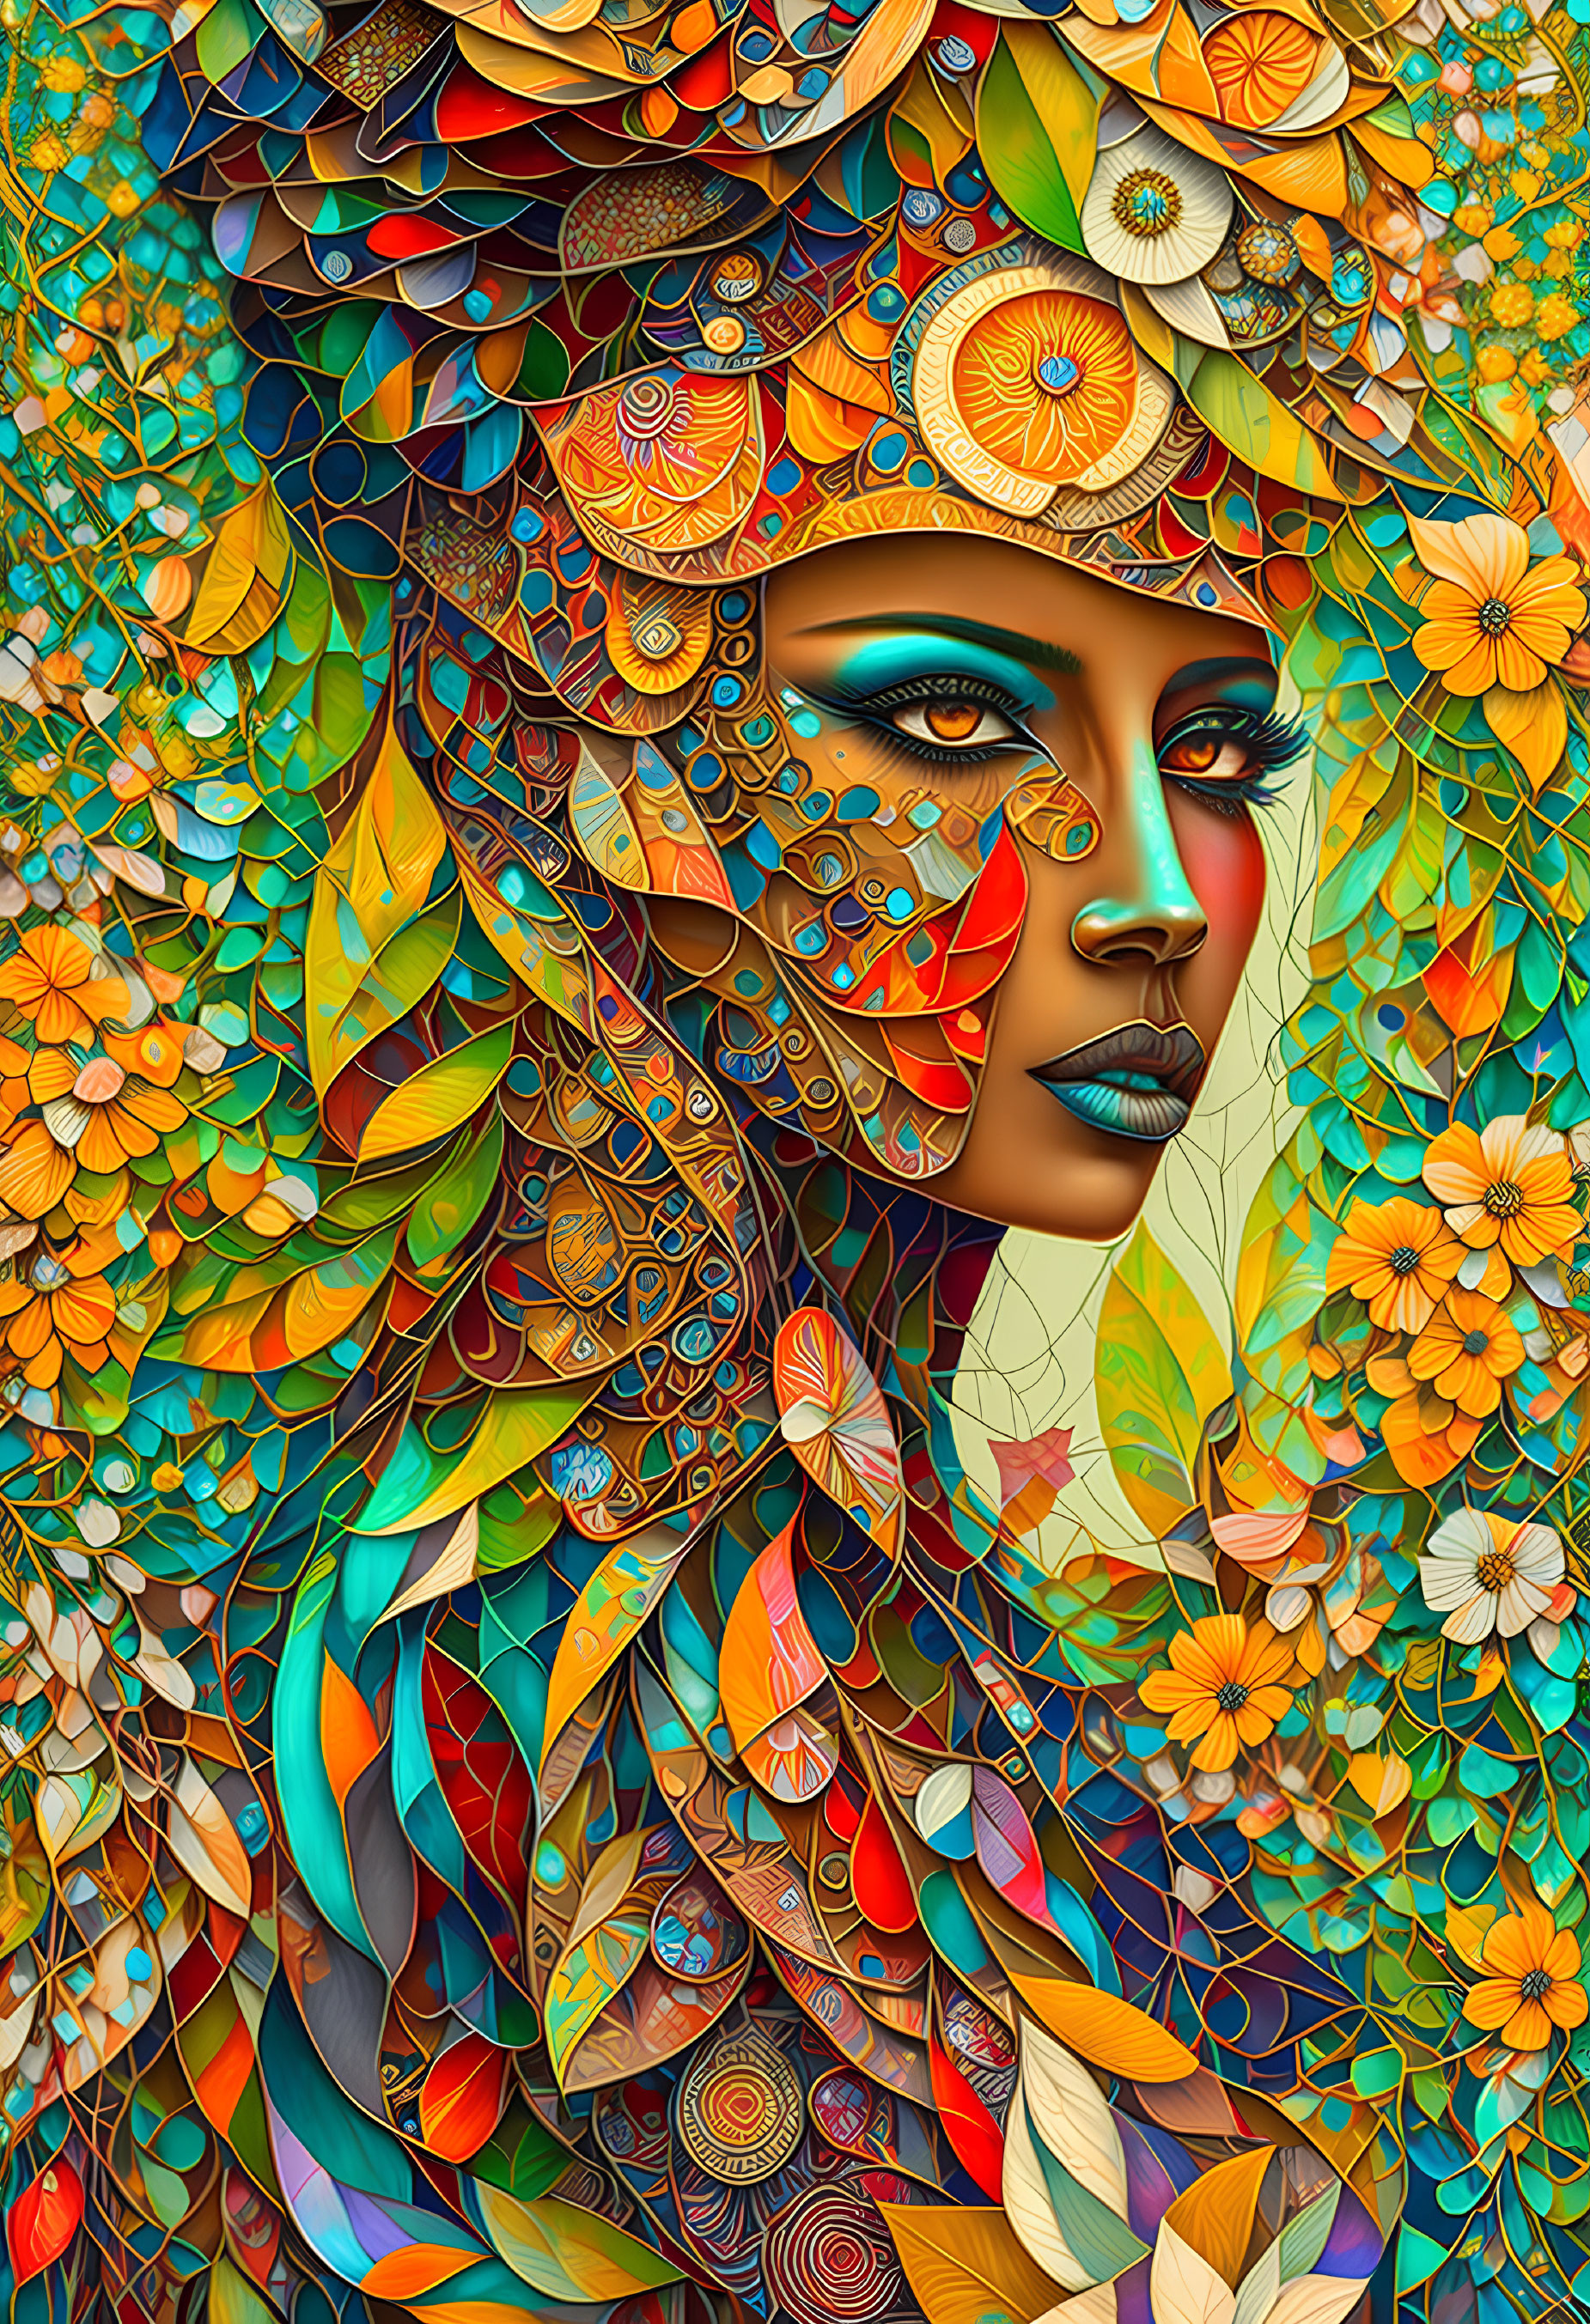 Colorful Woman Illustration with Floral and Geometric Patterns in Autumn Theme